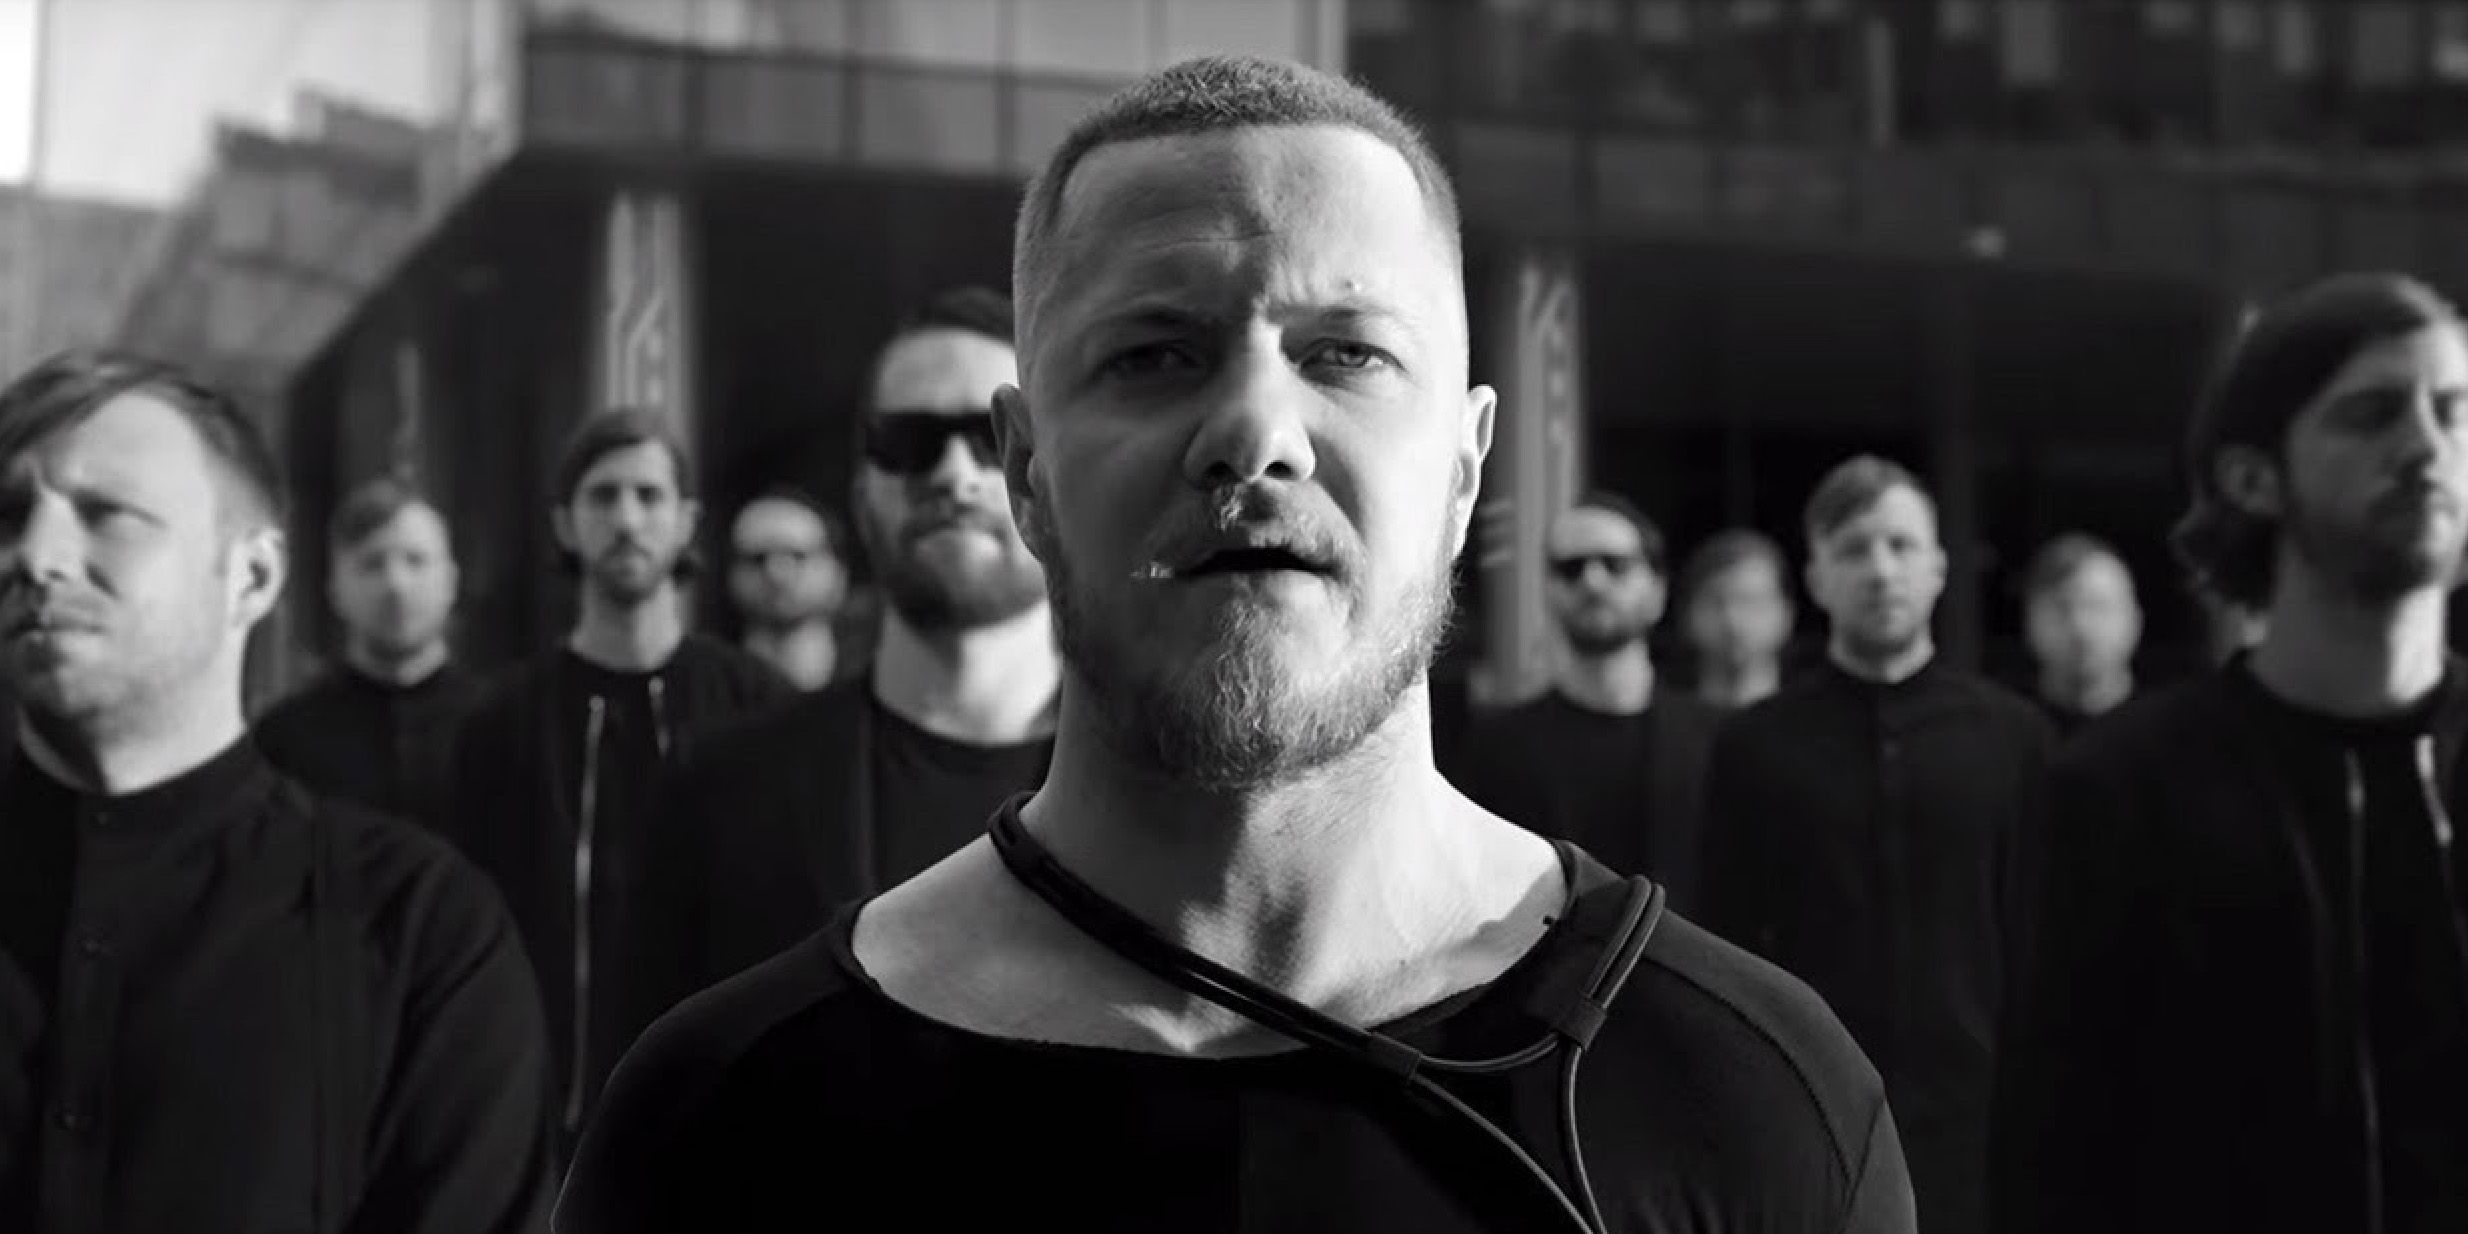 imagine-dragons-social-featured